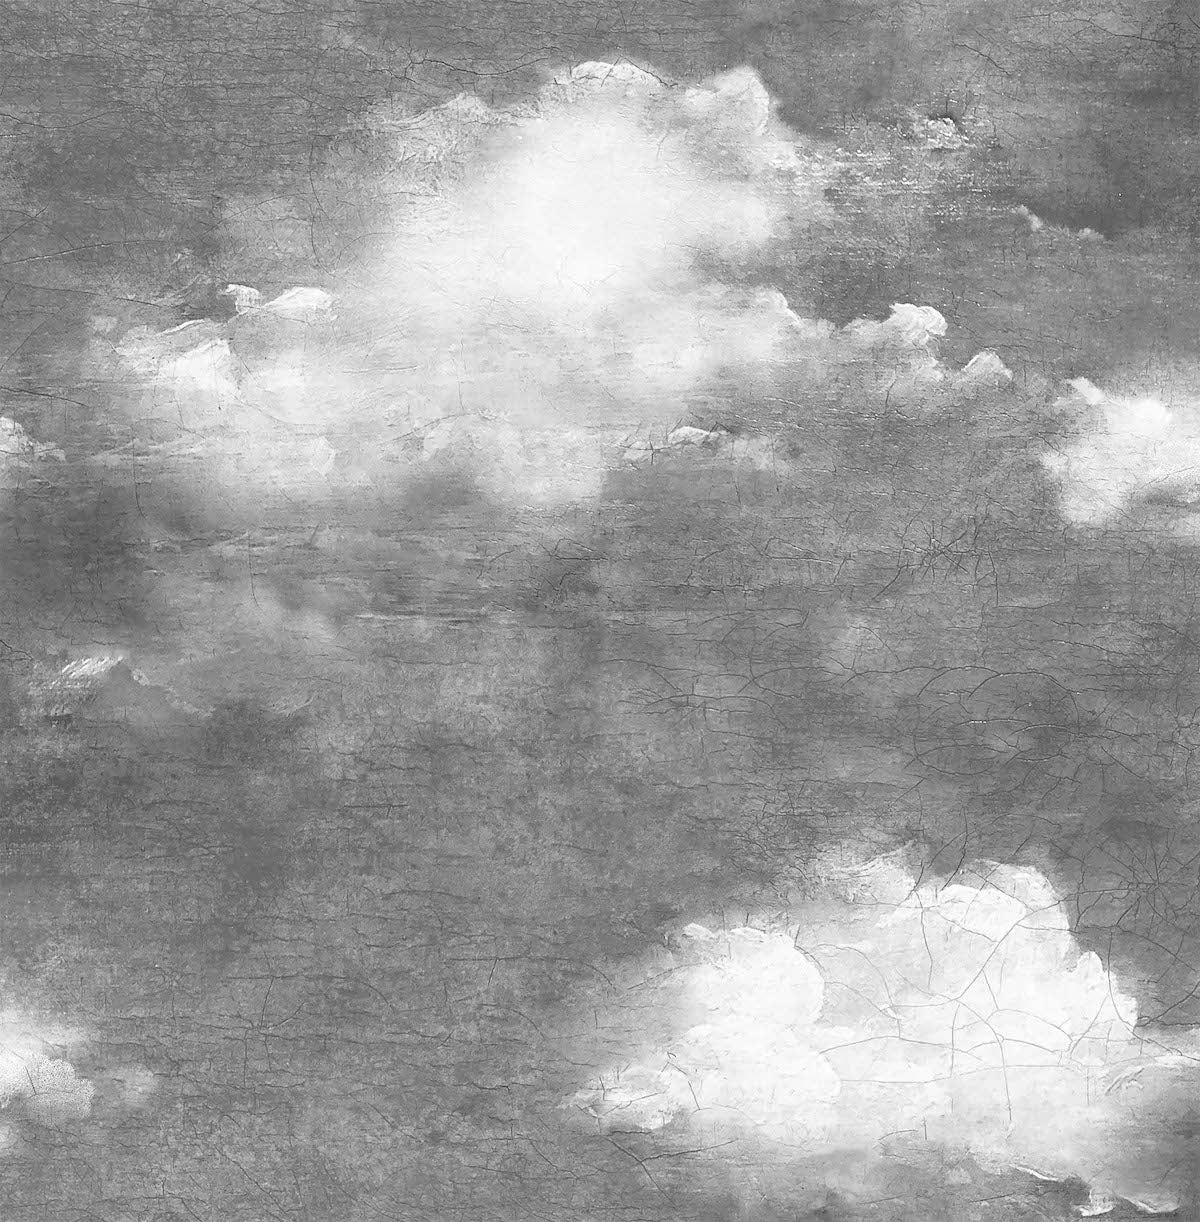 76400 Black And White Clouds Stock Photos Pictures  RoyaltyFree Images   iStock  Black and white clouds sun